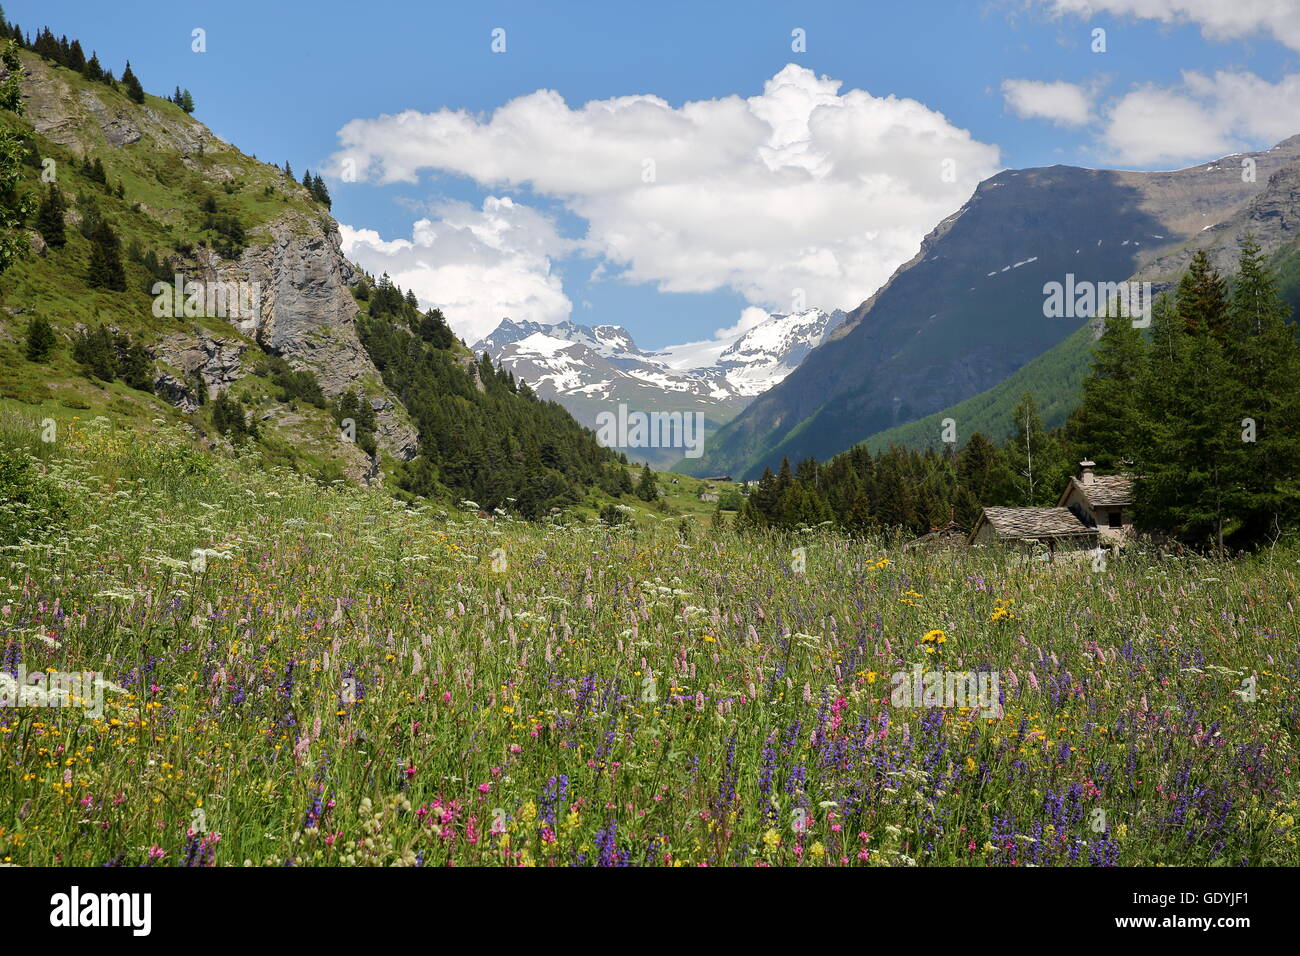 Landscape near Lanslevillard with colourful flowers in the foreground, Vanoise National Park, Northern Alps, Savoie, France Stock Photo